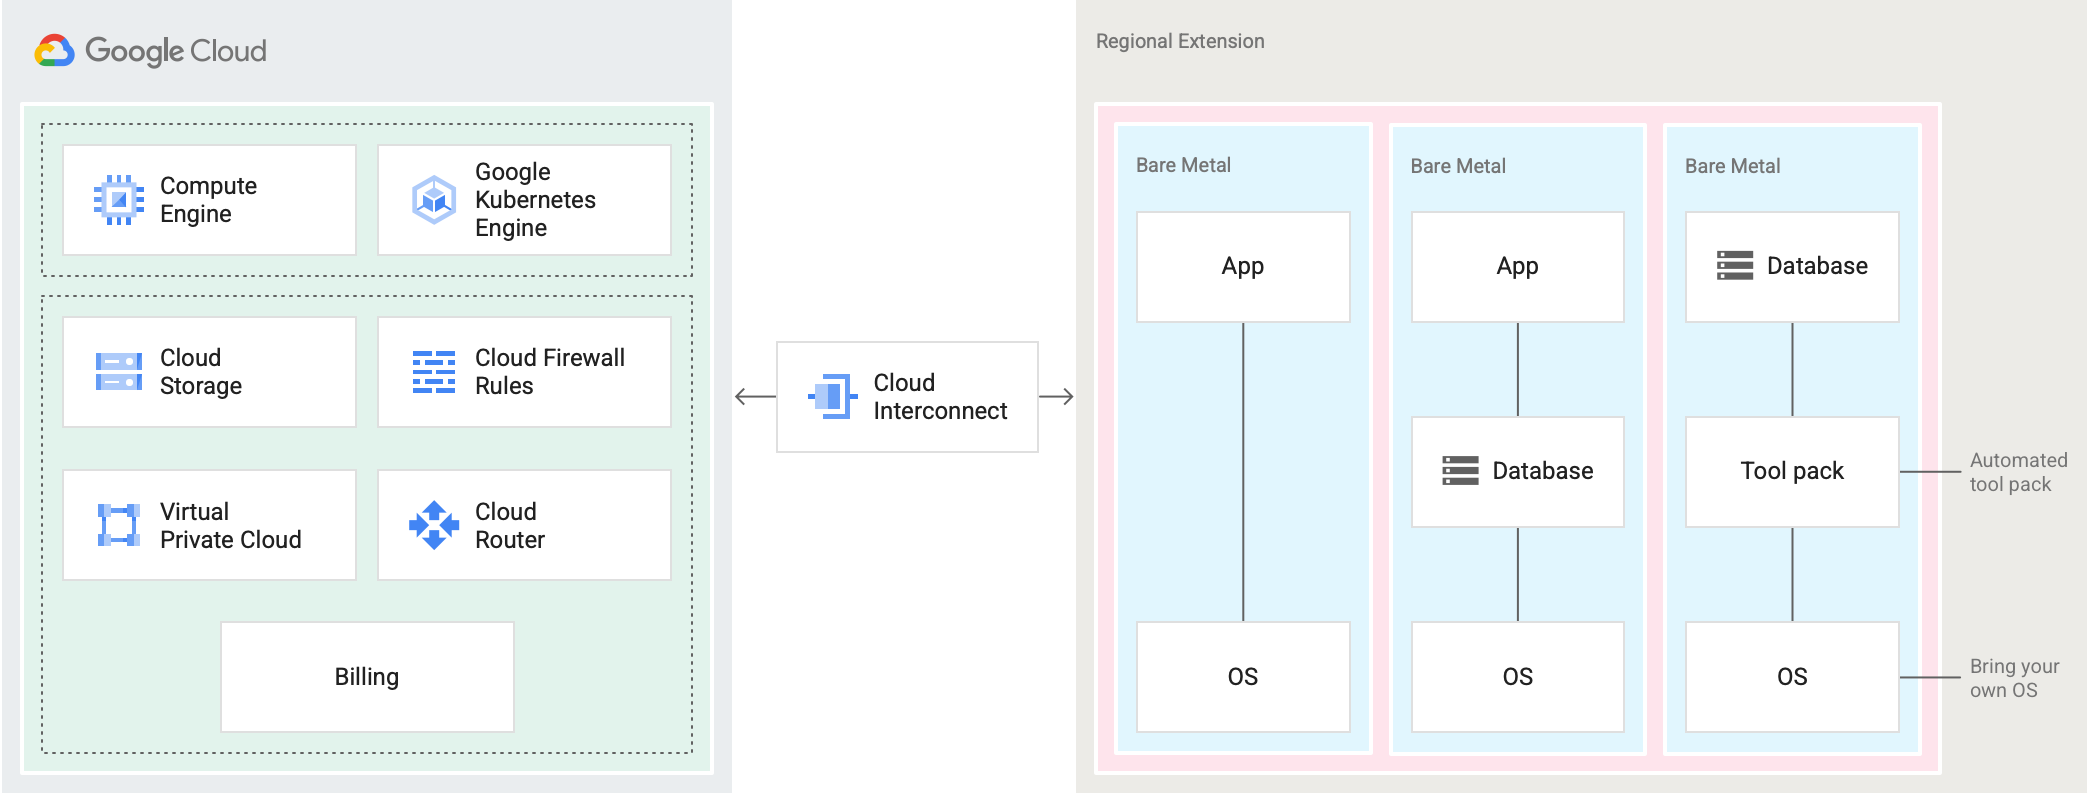 Bare-metal servers are shown in a regional extension that is colocated
with a Google Cloud data center